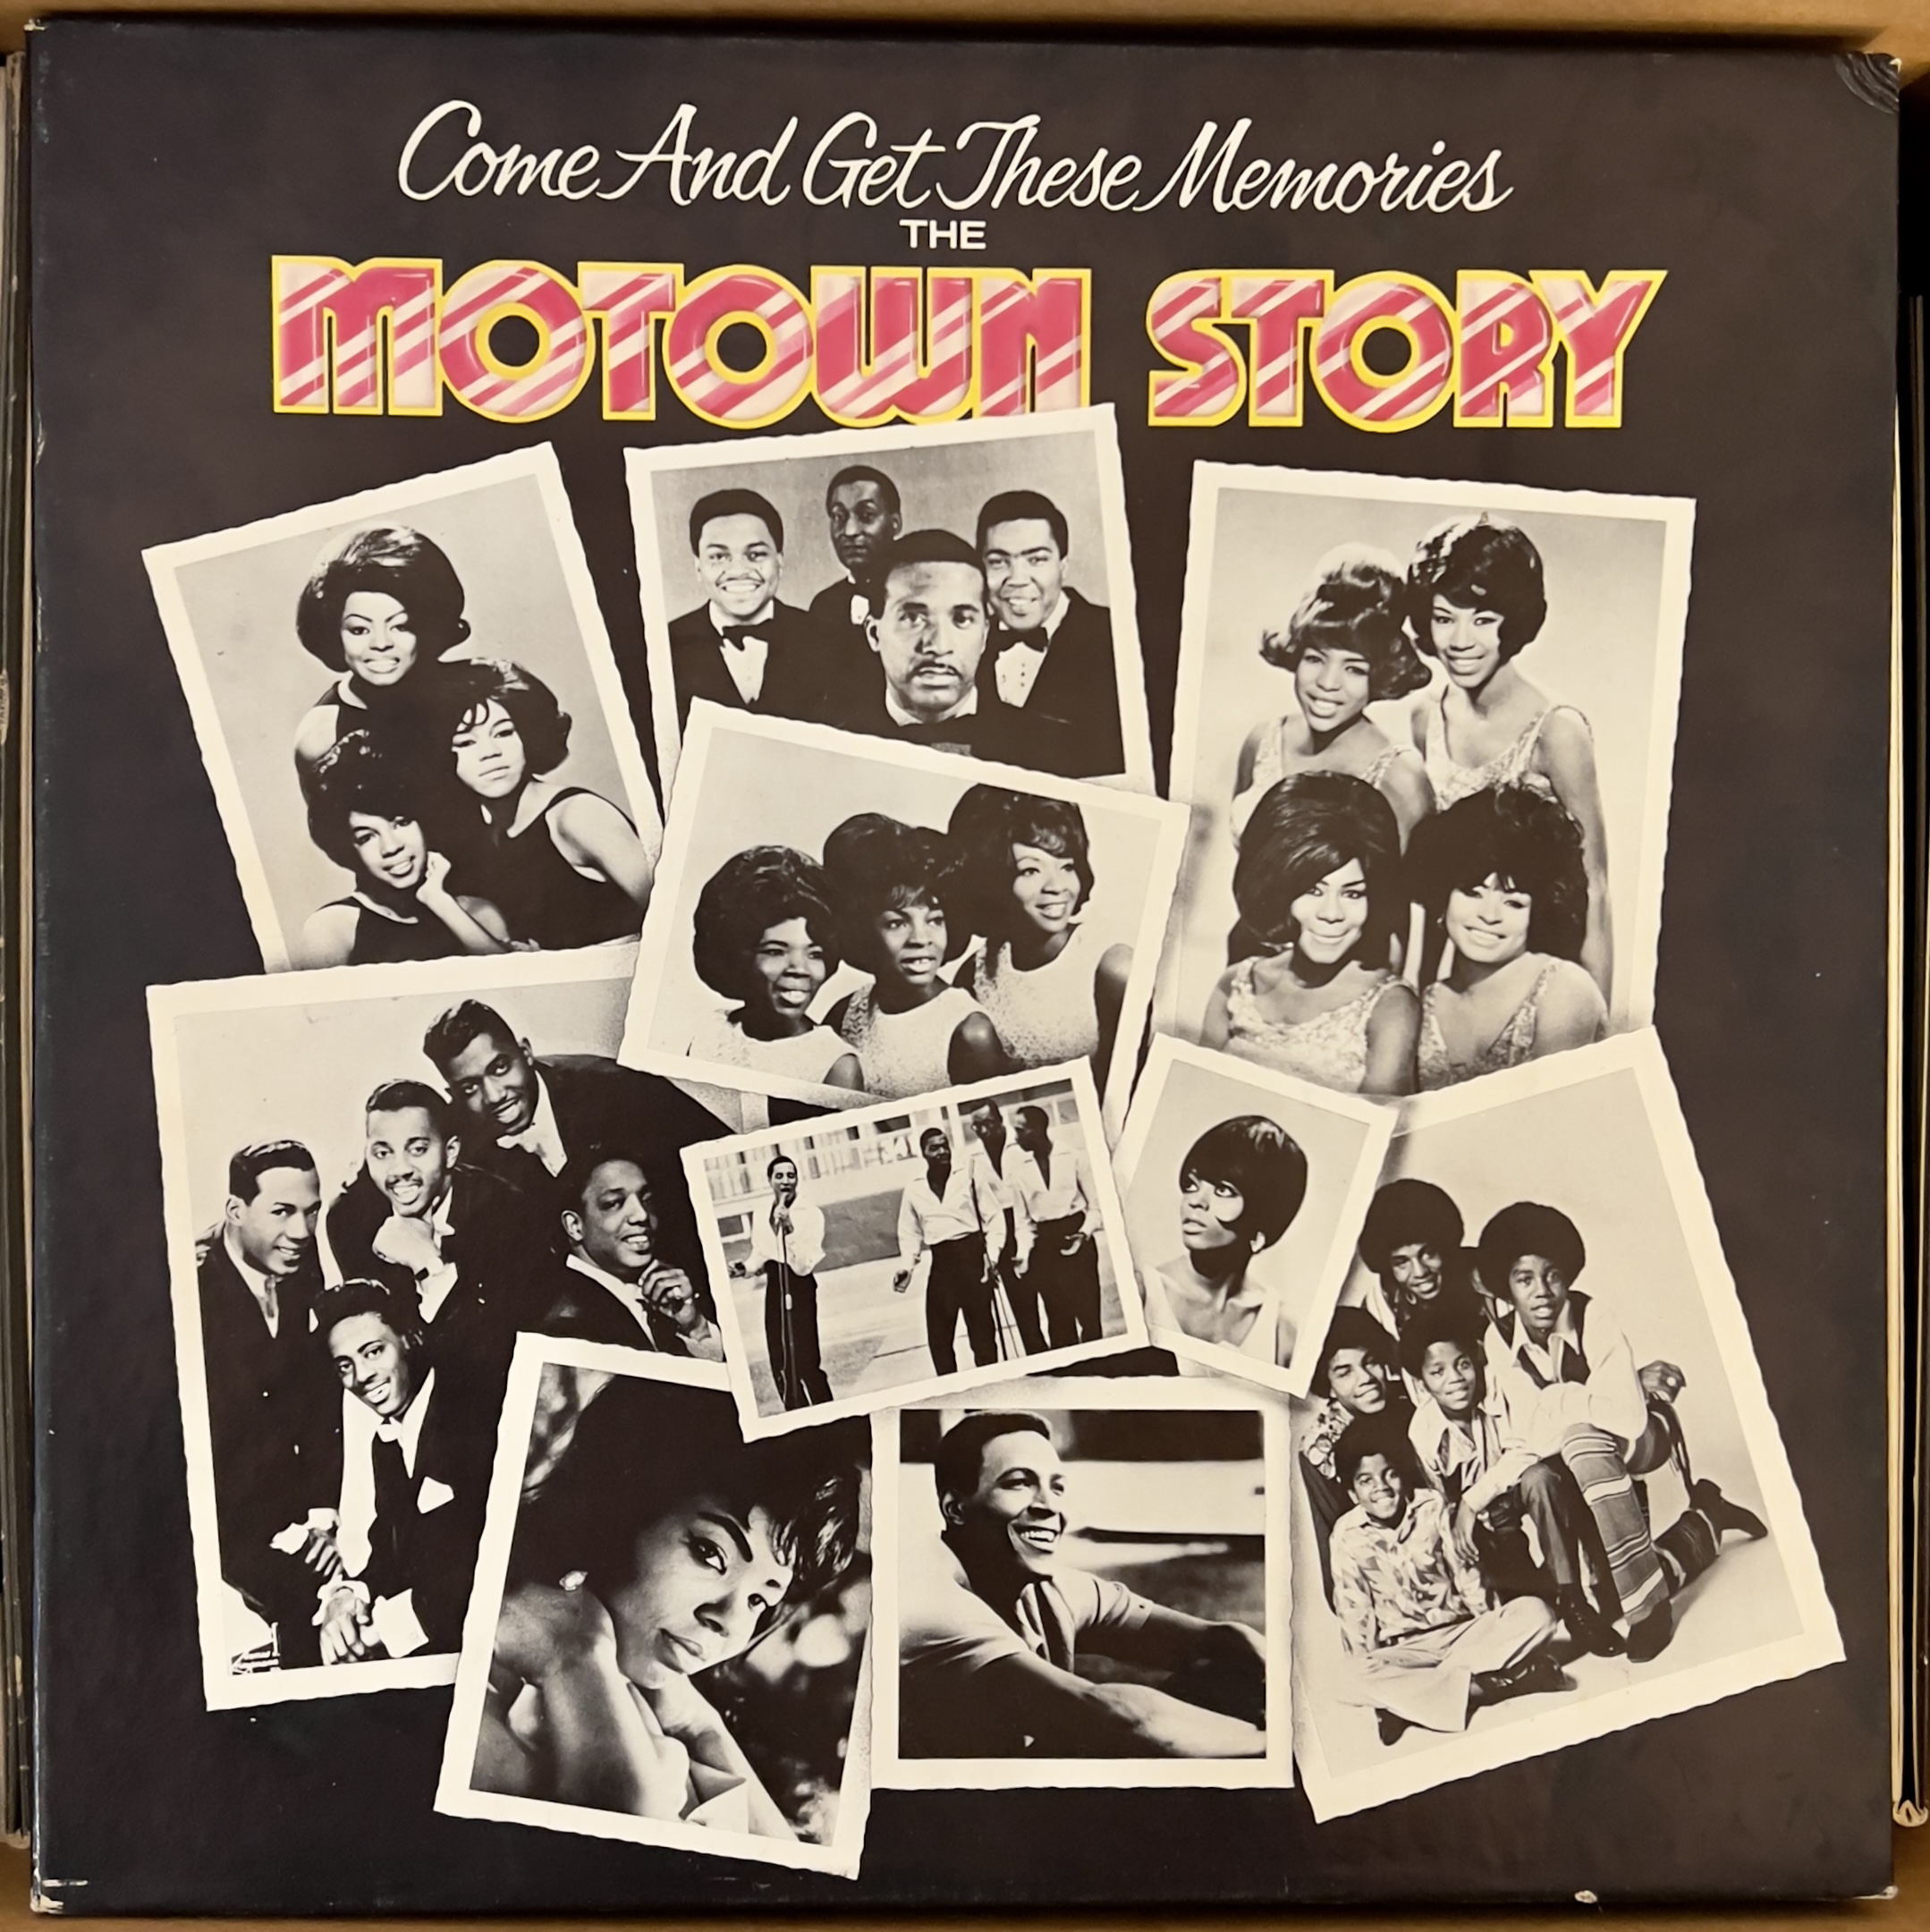 Come And Get These Memories: The Motown Story